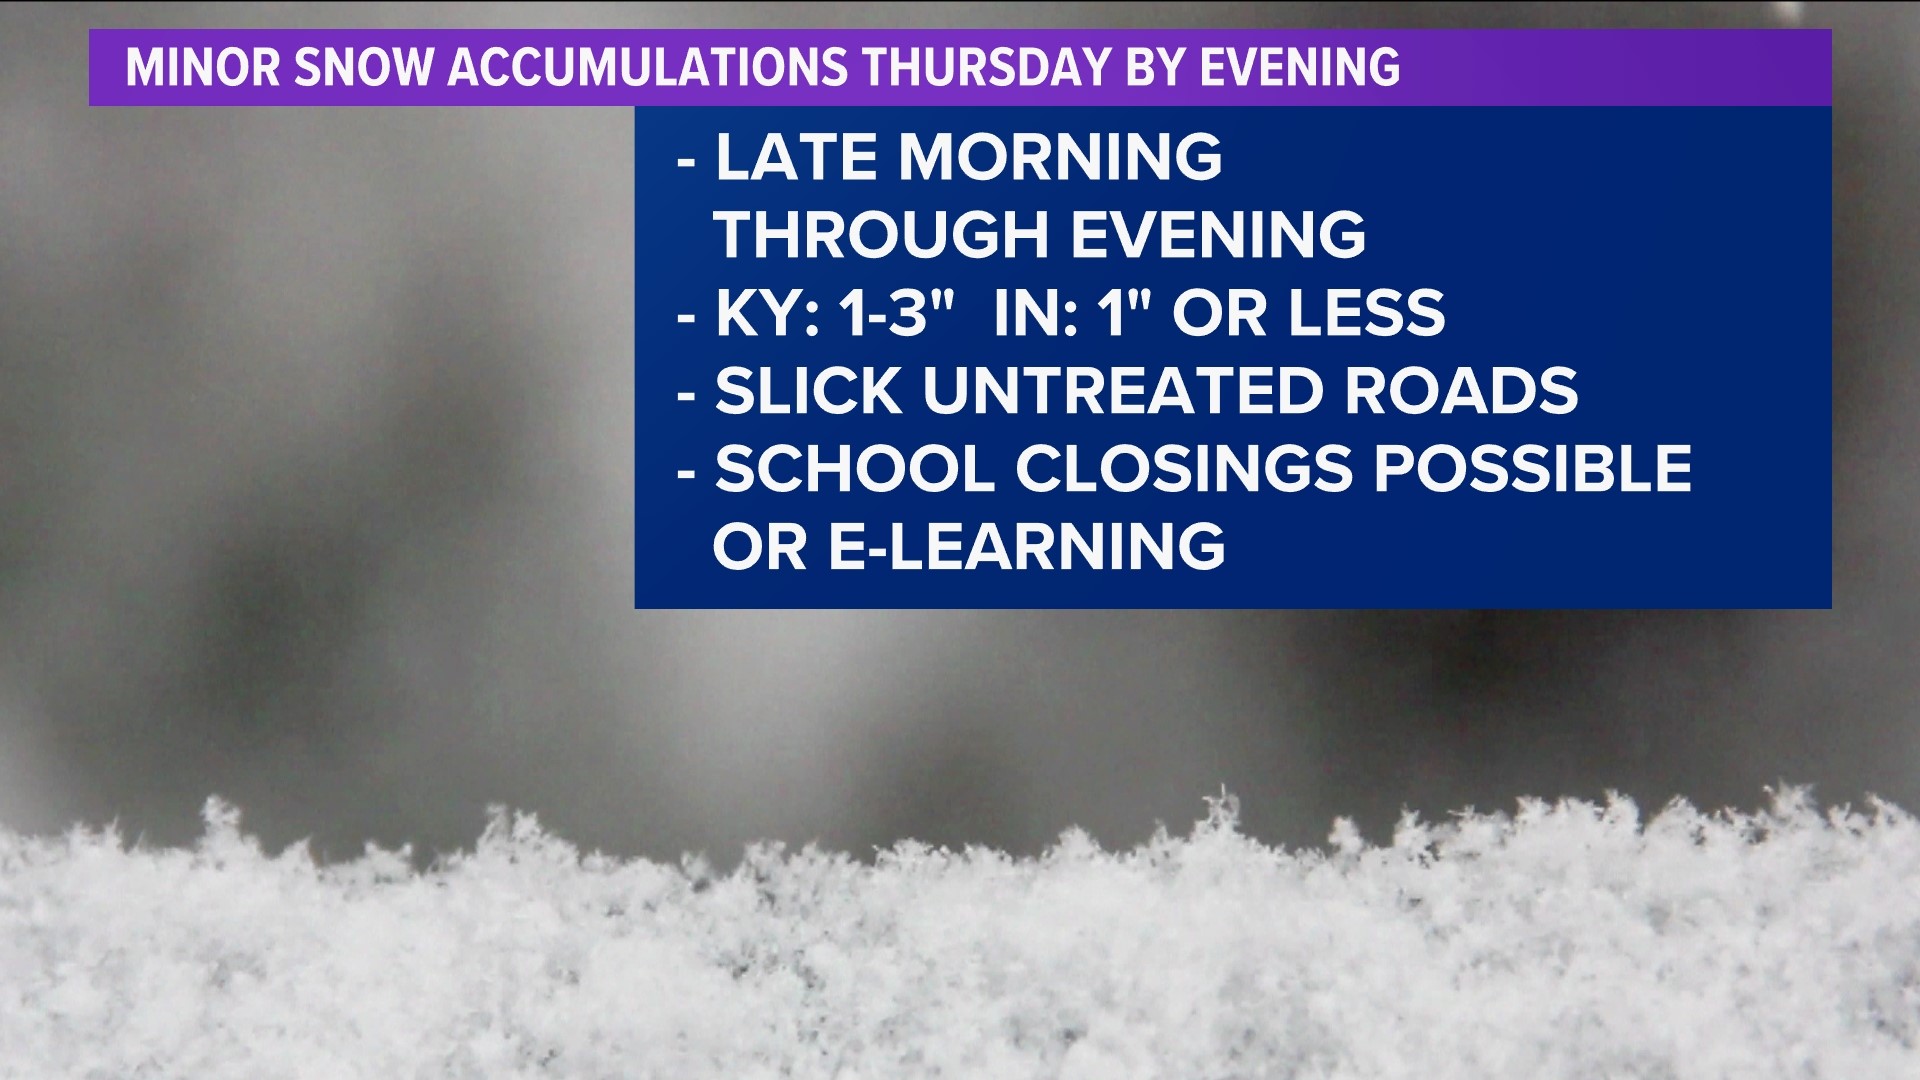 Minor snowfall accumulations on the way for Thursday - here's how much to expect and the impacts!